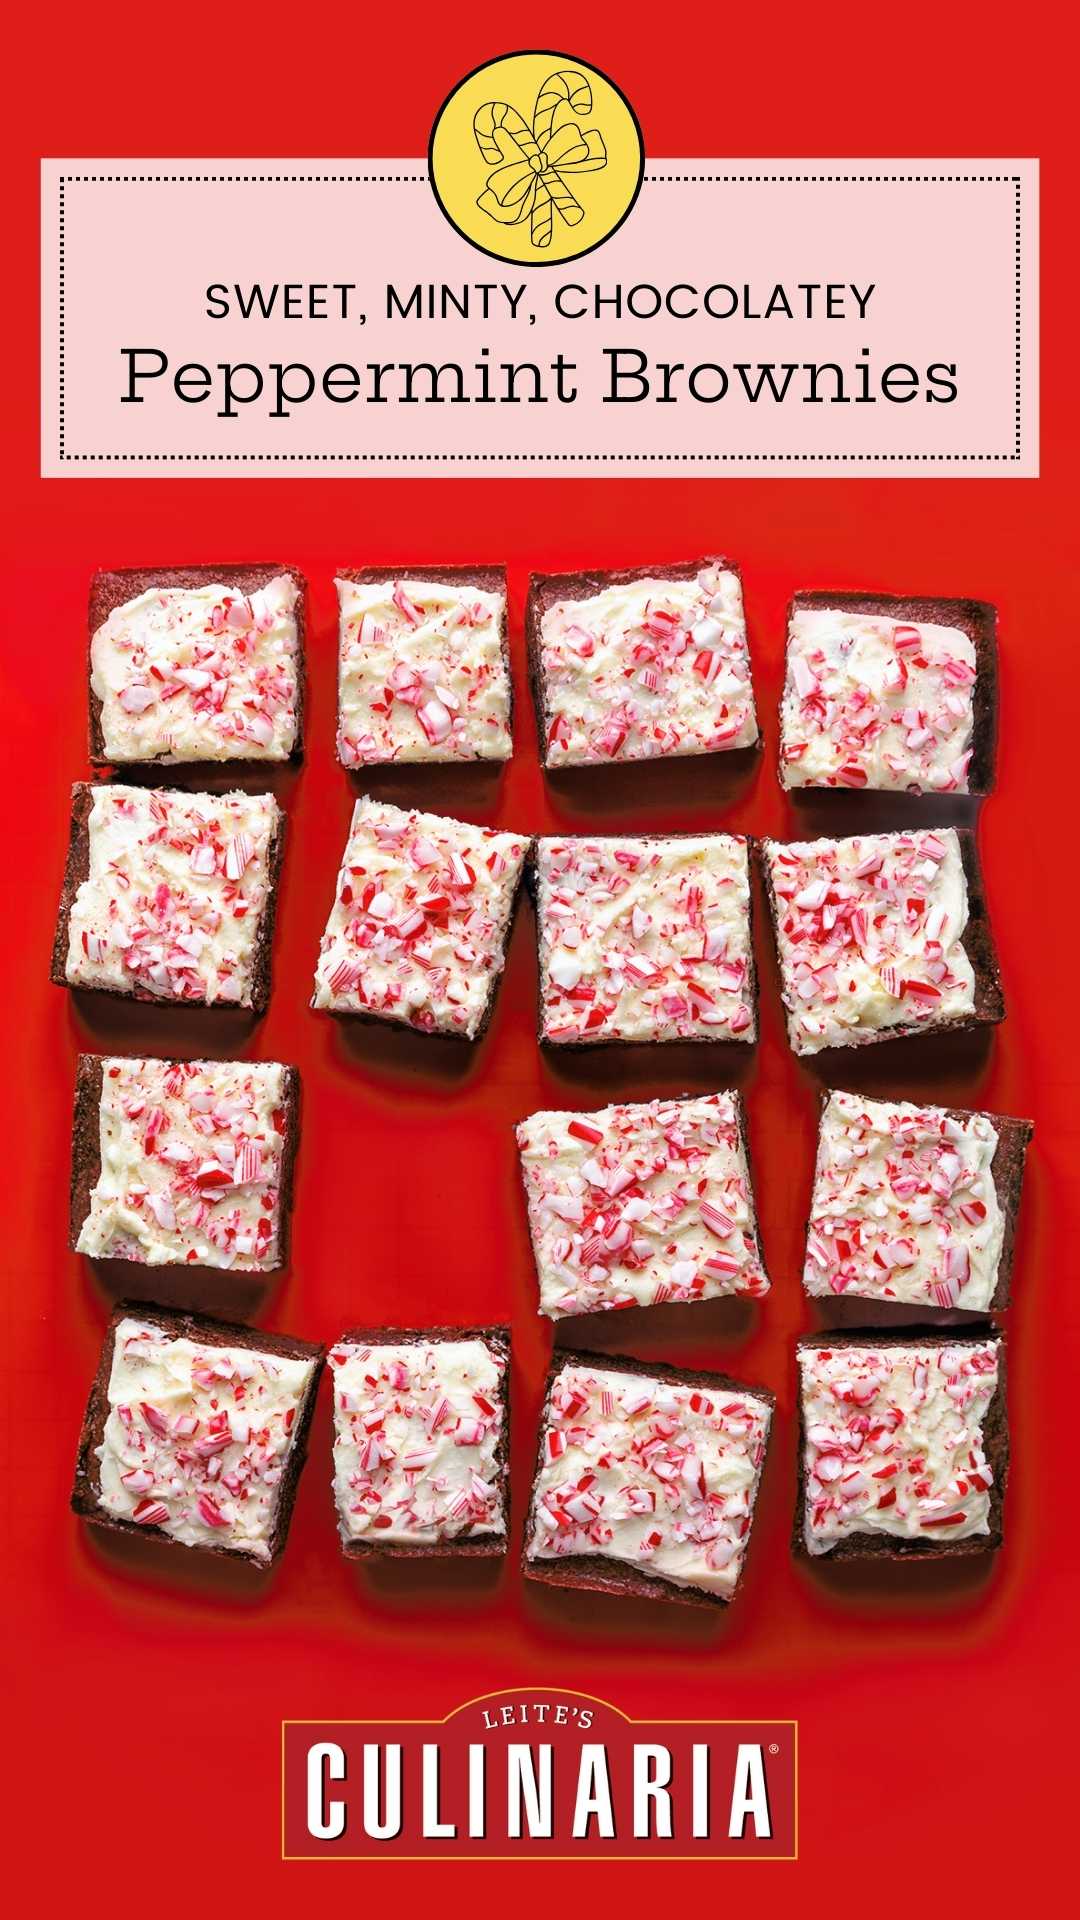 Fifteen brownies, frosted with white frosting and speckled with crushed peppermint candies.